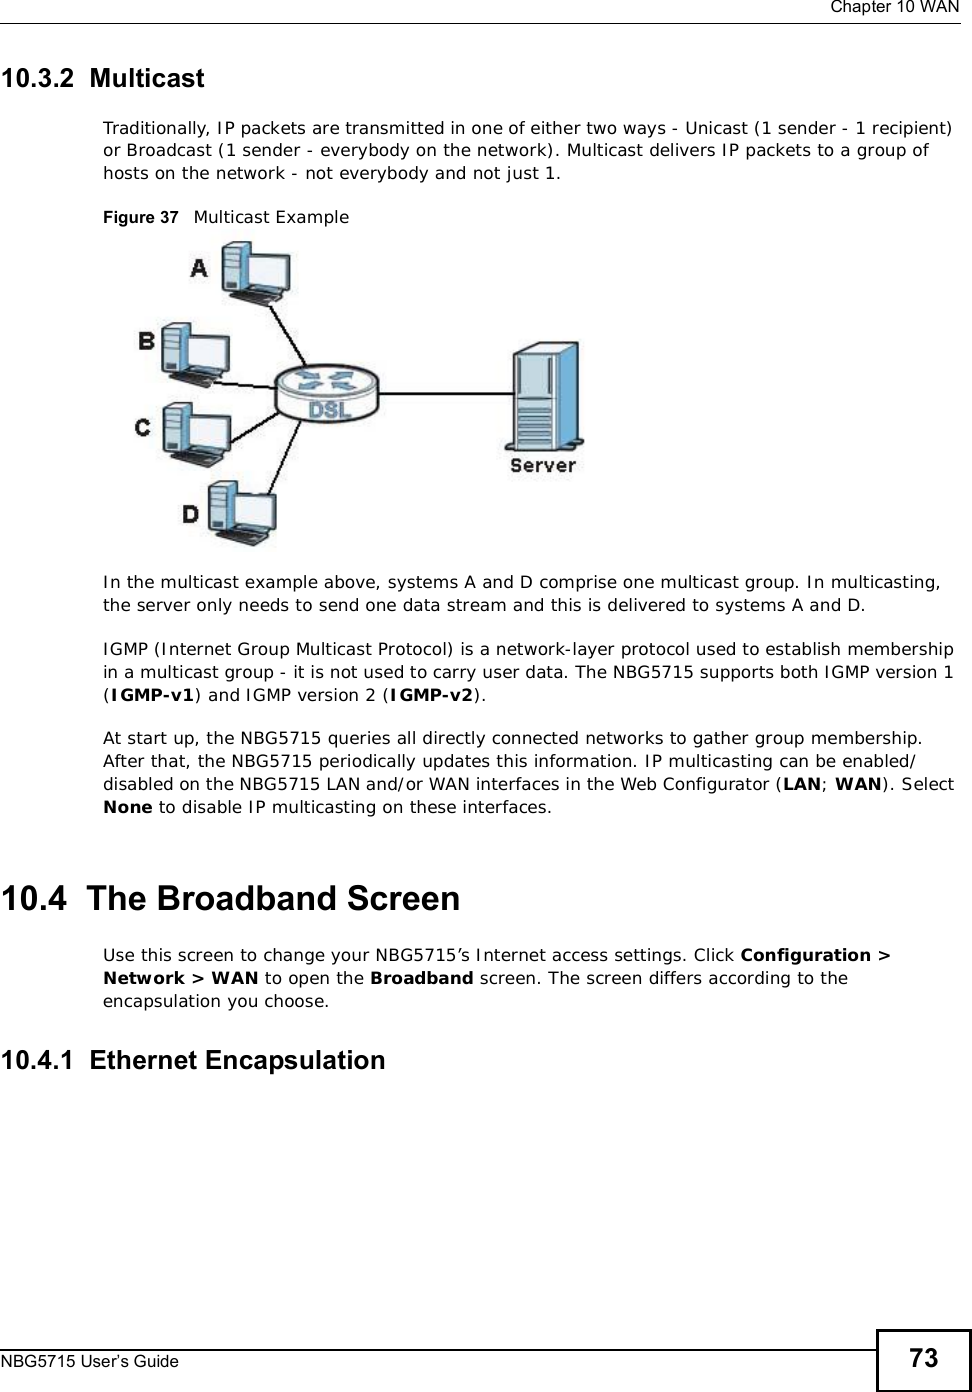  Chapter 10WANNBG5715 User’s Guide 7310.3.2  MulticastTraditionally, IP packets are transmitted in one of either two ways - Unicast (1 sender - 1 recipient) or Broadcast (1 sender - everybody on the network). Multicast delivers IP packets to a group of hosts on the network - not everybody and not just 1. Figure 37   Multicast ExampleIn the multicast example above, systems A and D comprise one multicast group. In multicasting, the server only needs to send one data stream and this is delivered to systems A and D. IGMP (Internet Group Multicast Protocol) is a network-layer protocol used to establish membership in a multicast group - it is not used to carry user data. The NBG5715 supports both IGMP version 1 (IGMP-v1) and IGMP version 2 (IGMP-v2).At start up, the NBG5715 queries all directly connected networks to gather group membership. After that, the NBG5715 periodically updates this information. IP multicasting can be enabled/disabled on the NBG5715 LAN and/or WAN interfaces in the Web Configurator (LAN; WAN). Select None to disable IP multicasting on these interfaces.10.4  The Broadband ScreenUse this screen to change your NBG5715’s Internet access settings. Click Configuration &gt; Network &gt; WAN to open the Broadband screen. The screen differs according to the encapsulation you choose.10.4.1  Ethernet Encapsulation